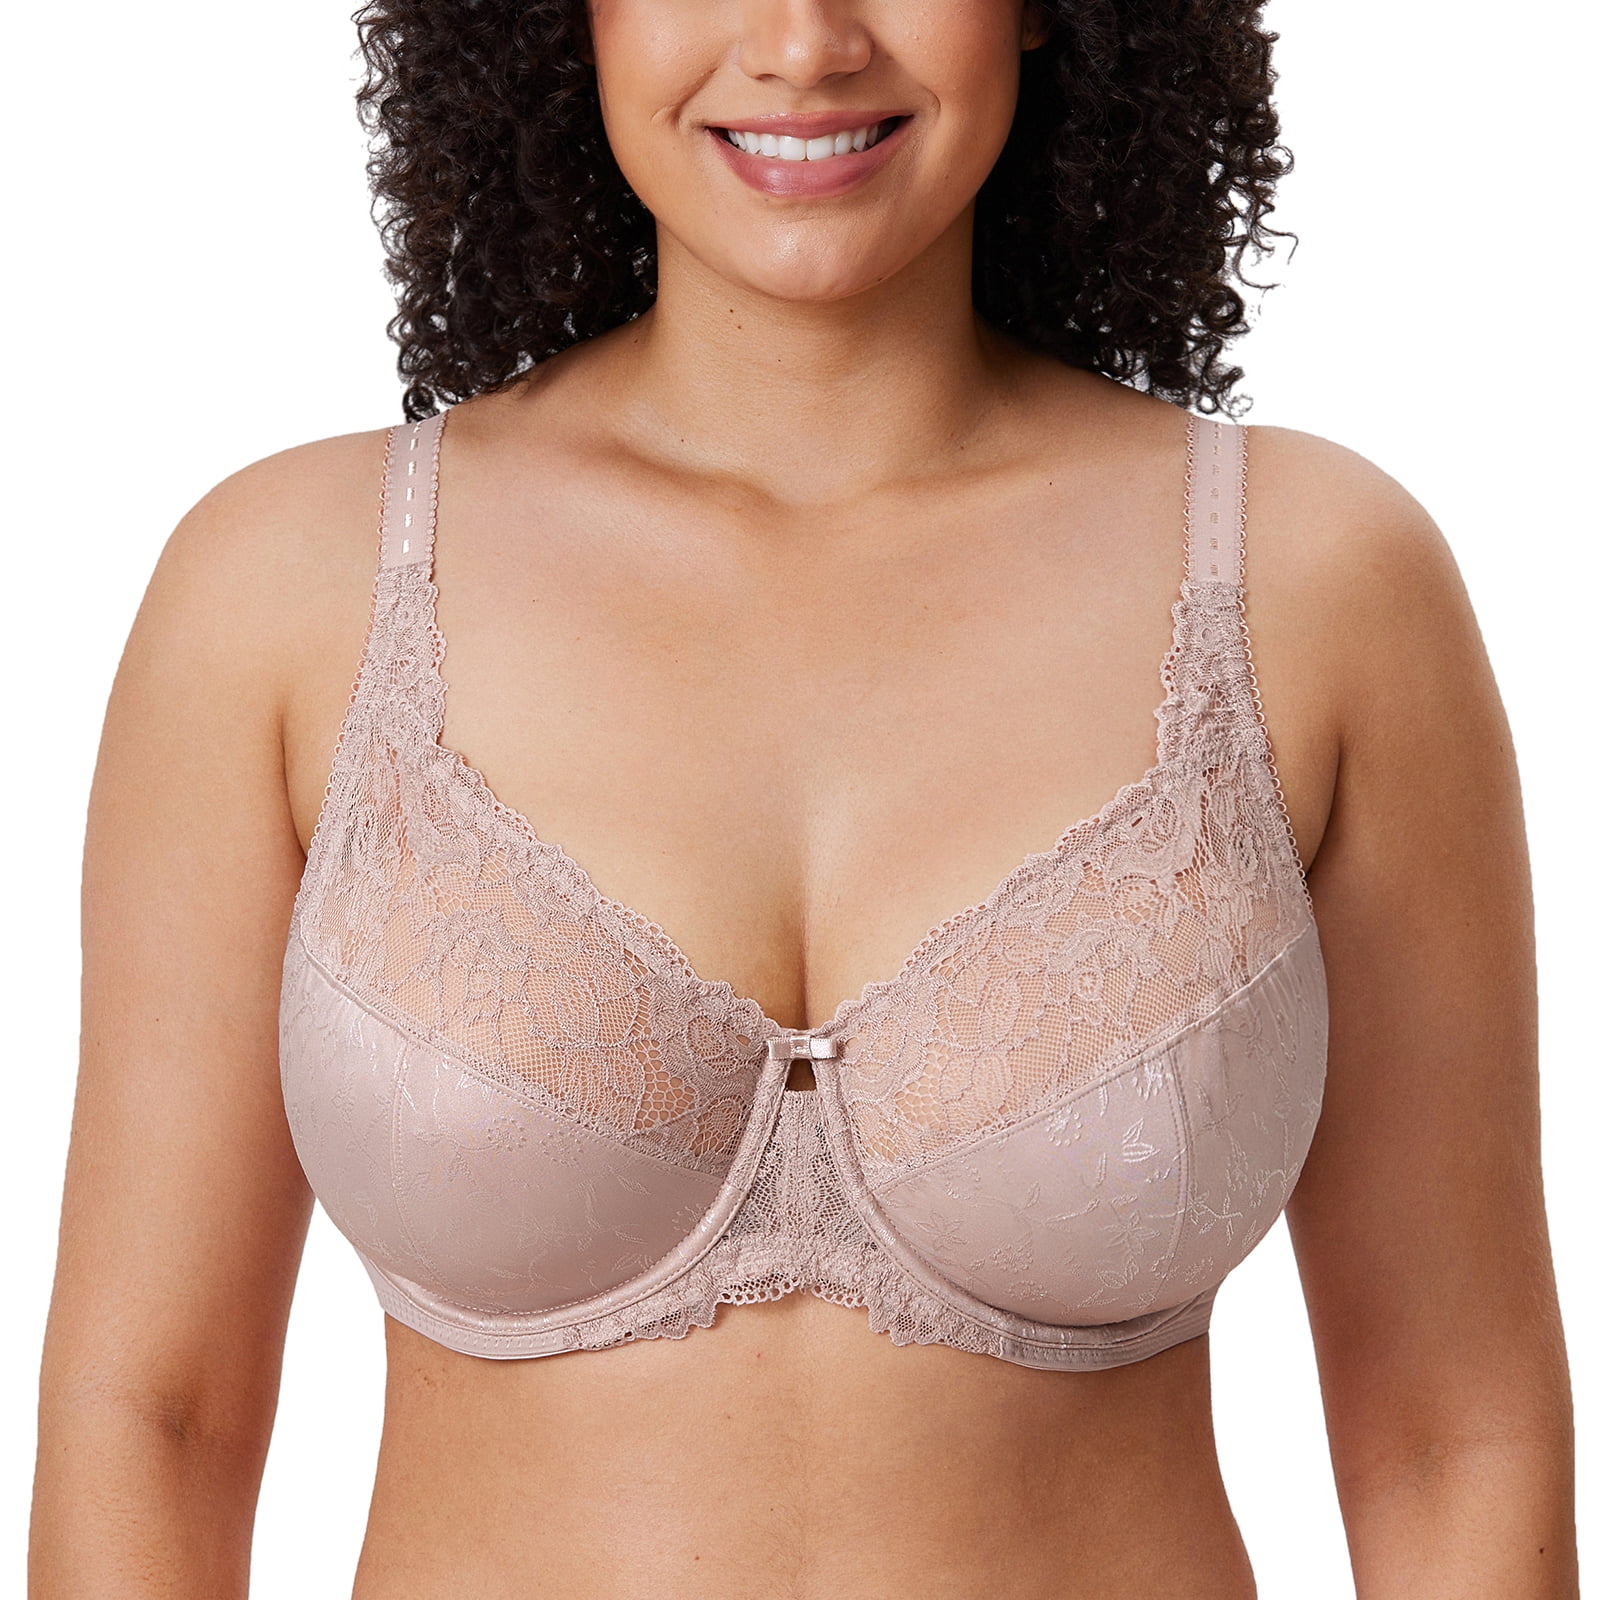  Womens Plus Size Full Coverage Underwire Unlined Minimizer  Lace Bra Light Brown 36C